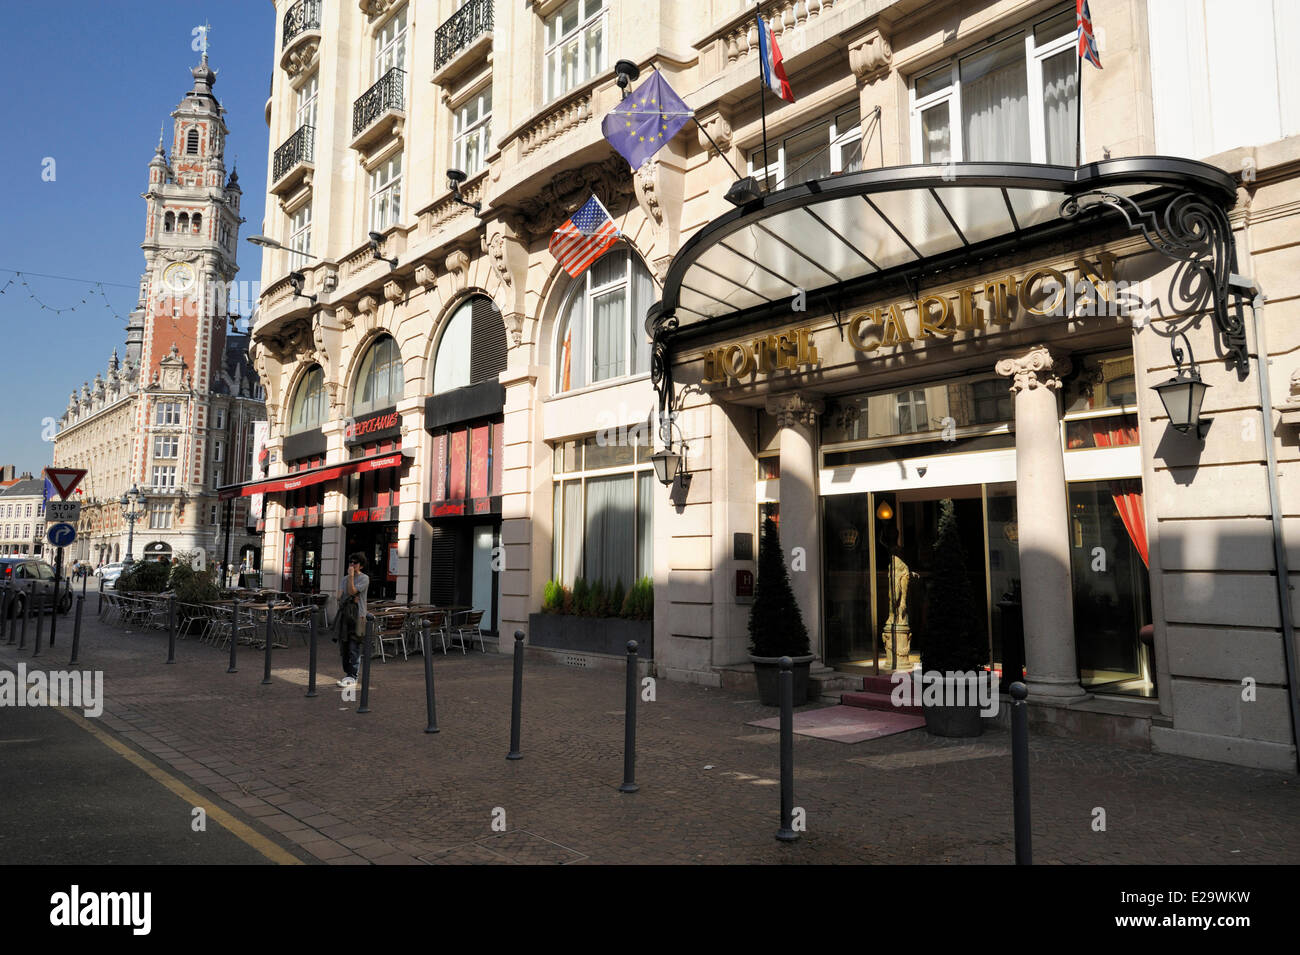 France, Nord, Lille, Hotel Carlton Stock Photo